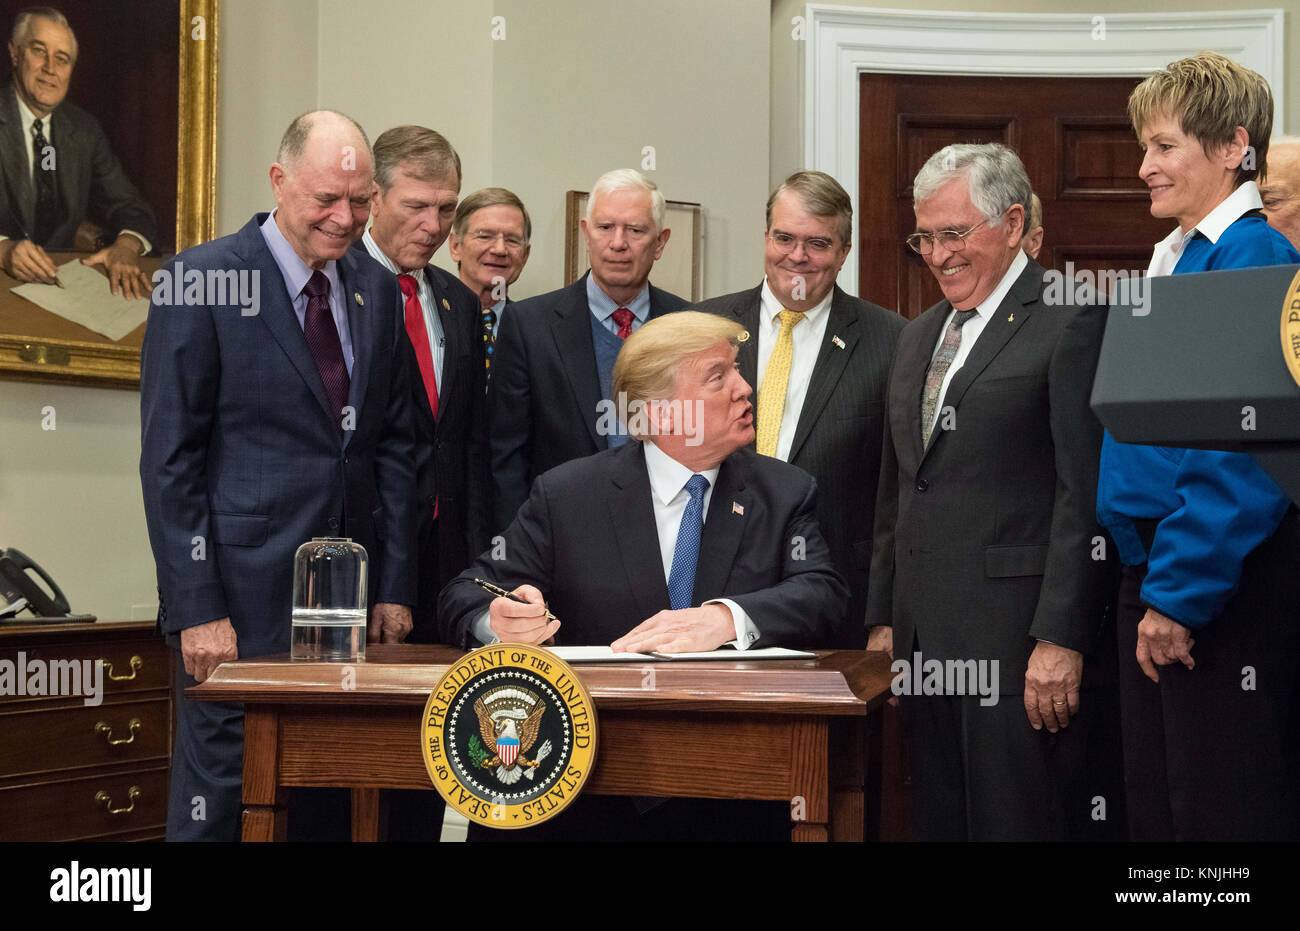 United States President Donald J. Trump prepares to sign the Presidential Space Directive. 11th Dec, 2017. 1, directing NASA to return to the moon, alongside members of the Senate, Congress, NASA, and commercial space companies in the Roosevelt Room of the White House in Washington, Monday, December 11, 2017. Mandatory Credit: Aubrey Gemignani/NASA via CNP Credit: Aubrey Gemignani/CNP/ZUMA Wire/Alamy Live News Stock Photo